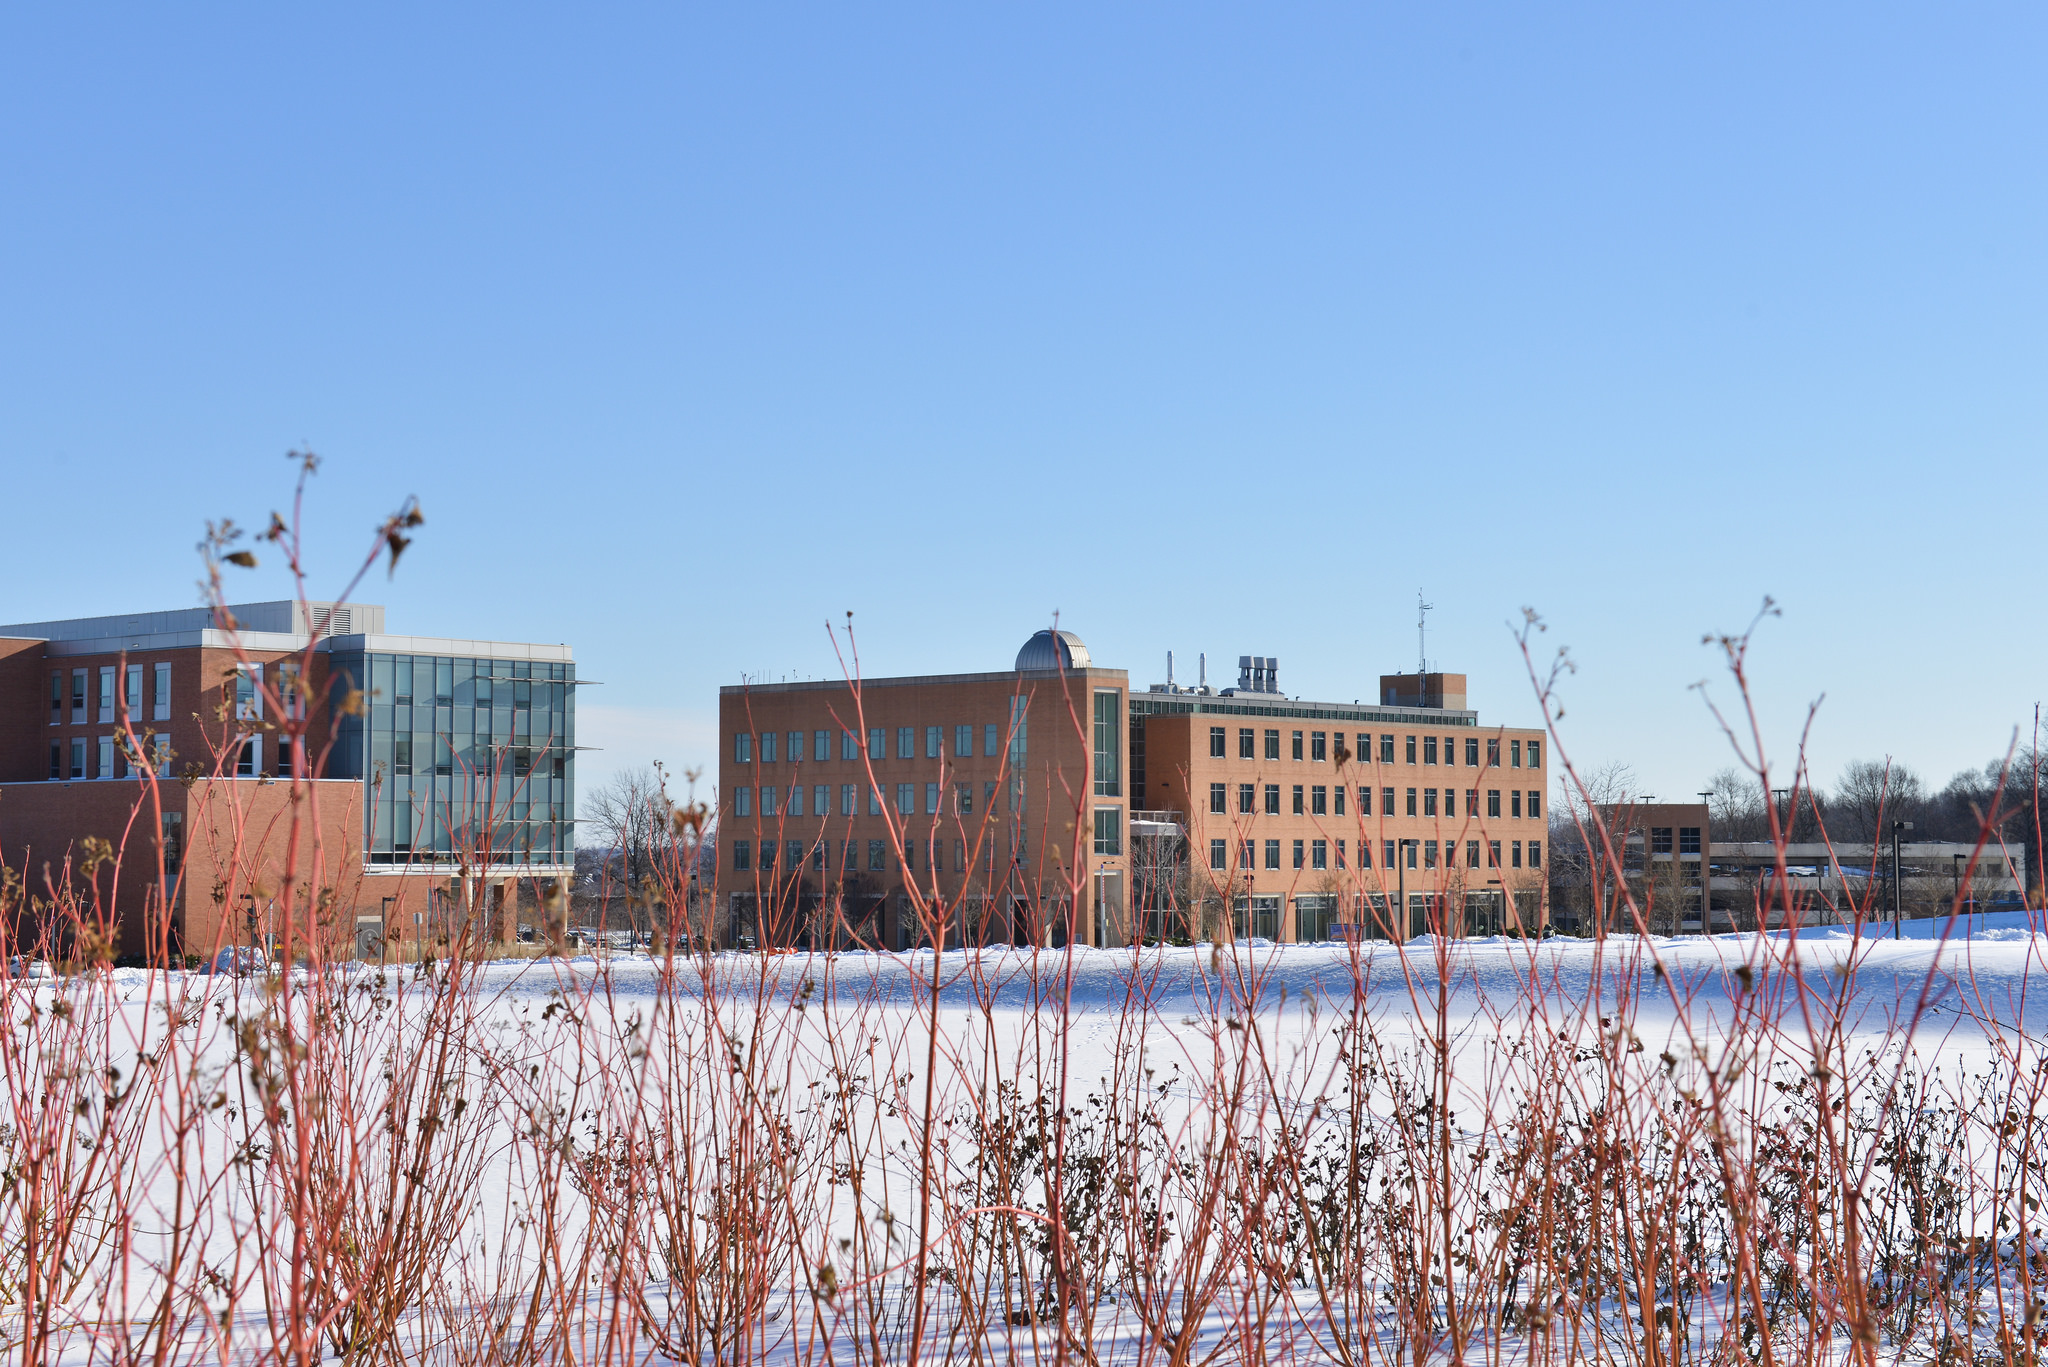 Update: Campus closed on Tuesday, Jan. 26 due to ongoing snow removal